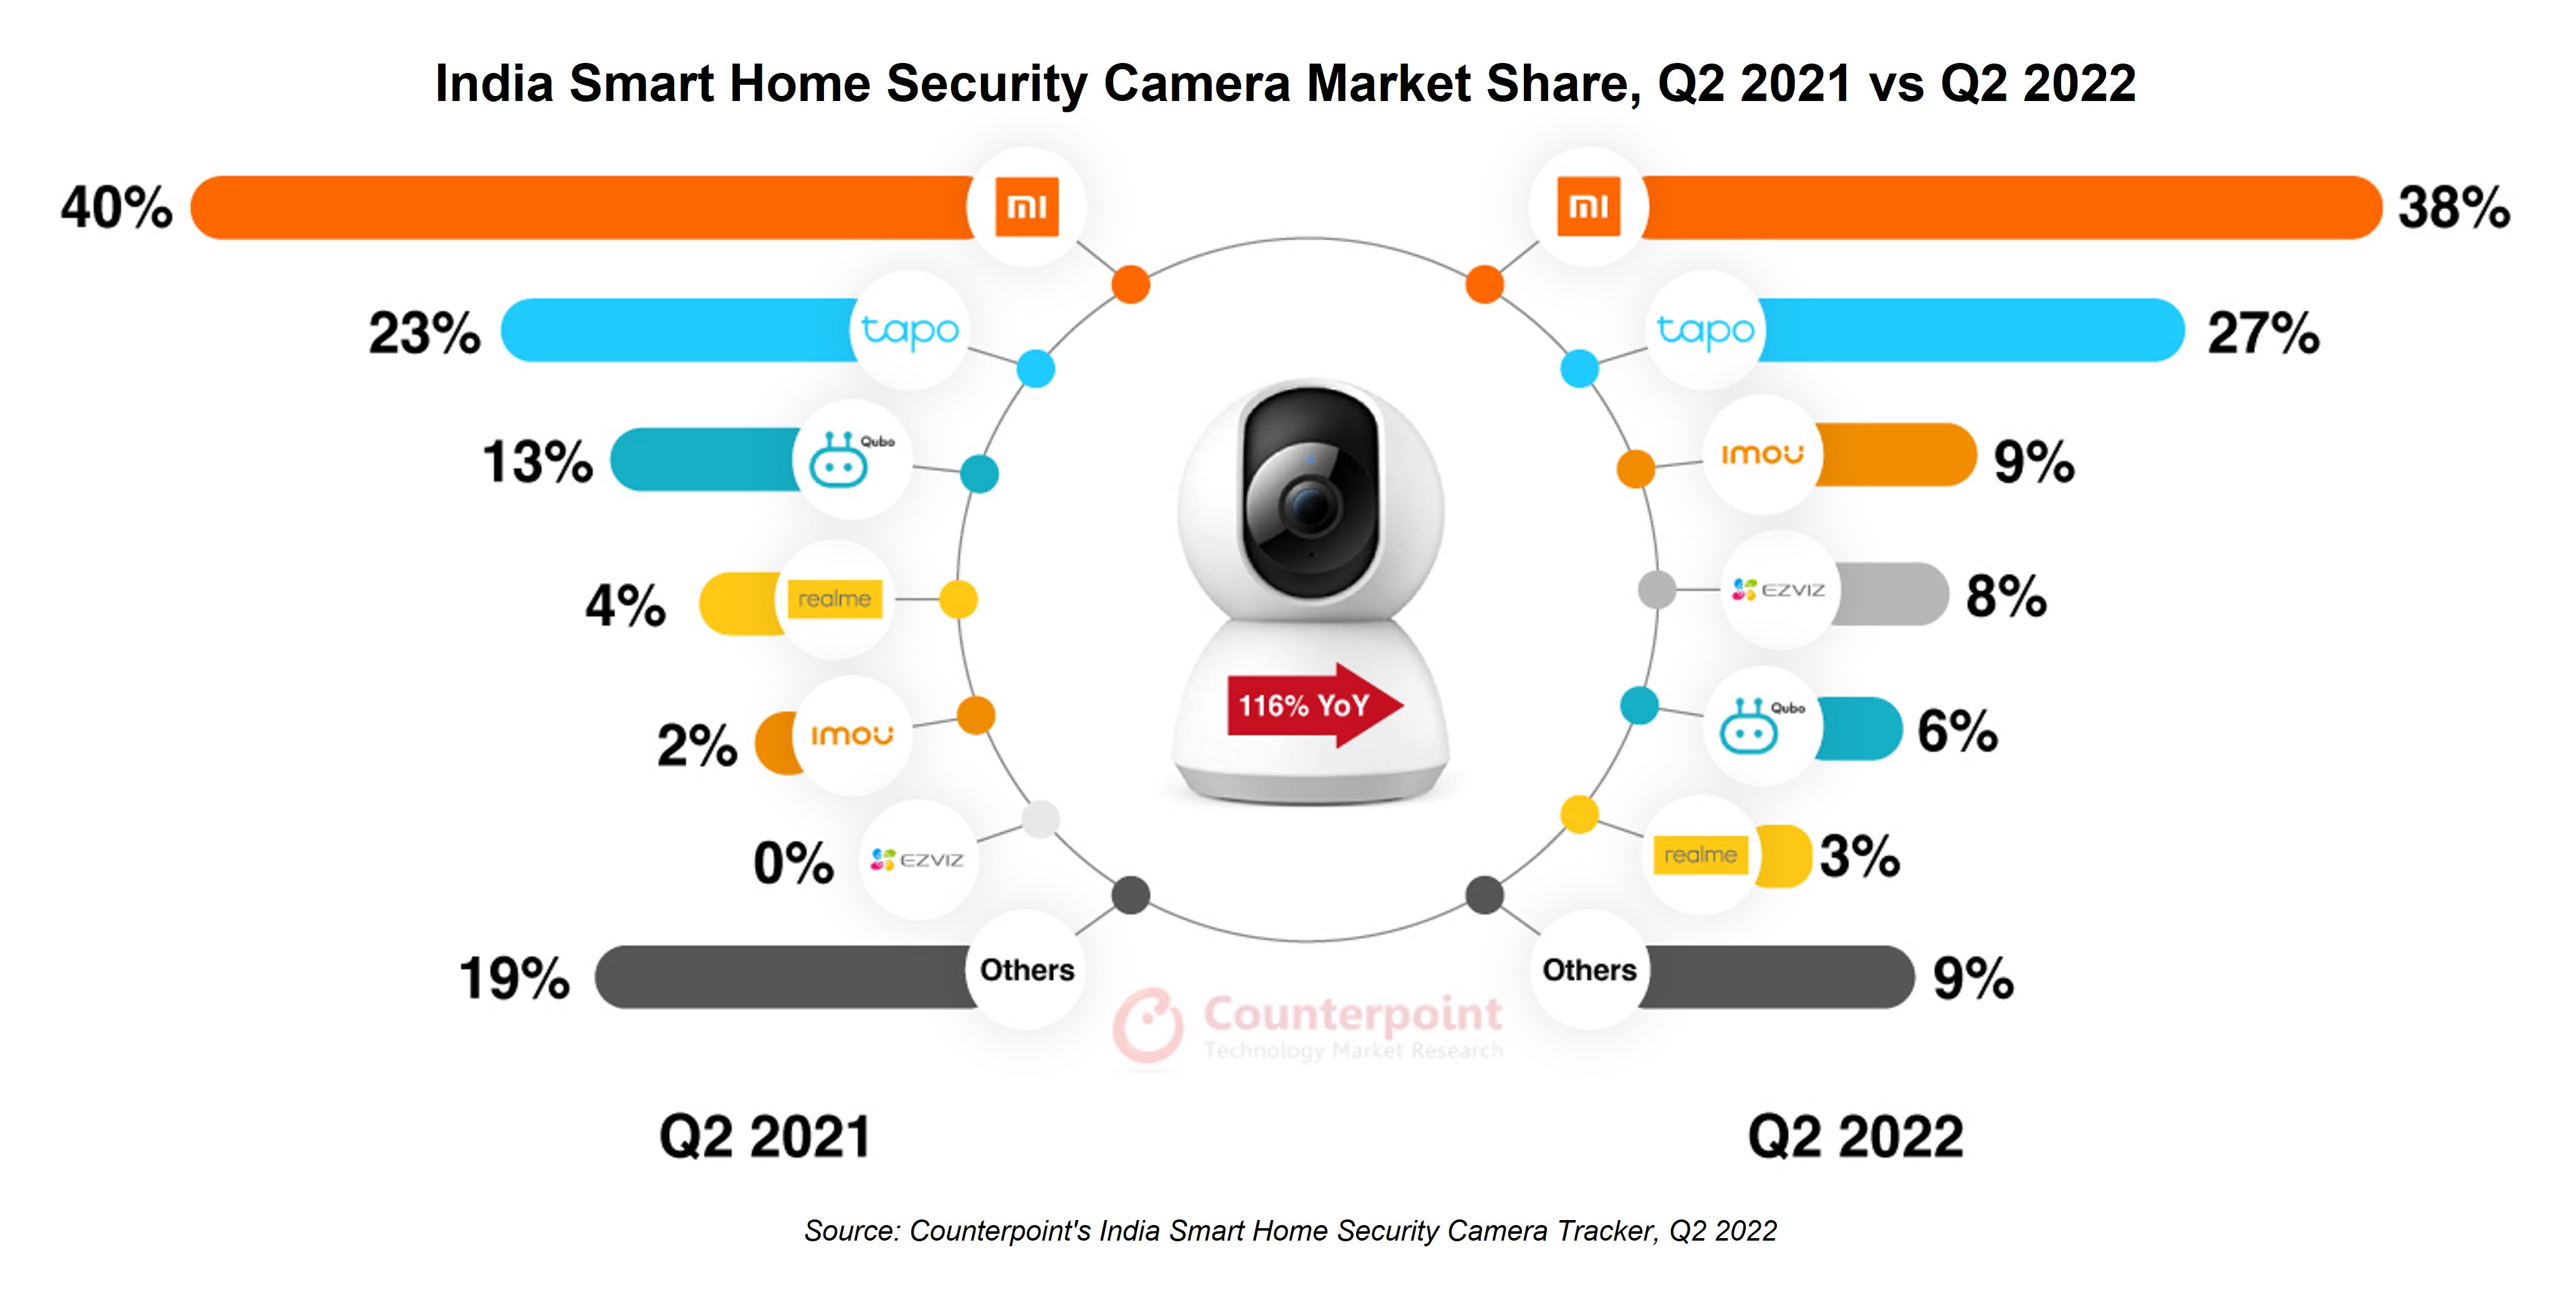 India Smart Home Security Camera Share, Q2 2021 vs Q2 2022, Counterpoint Research